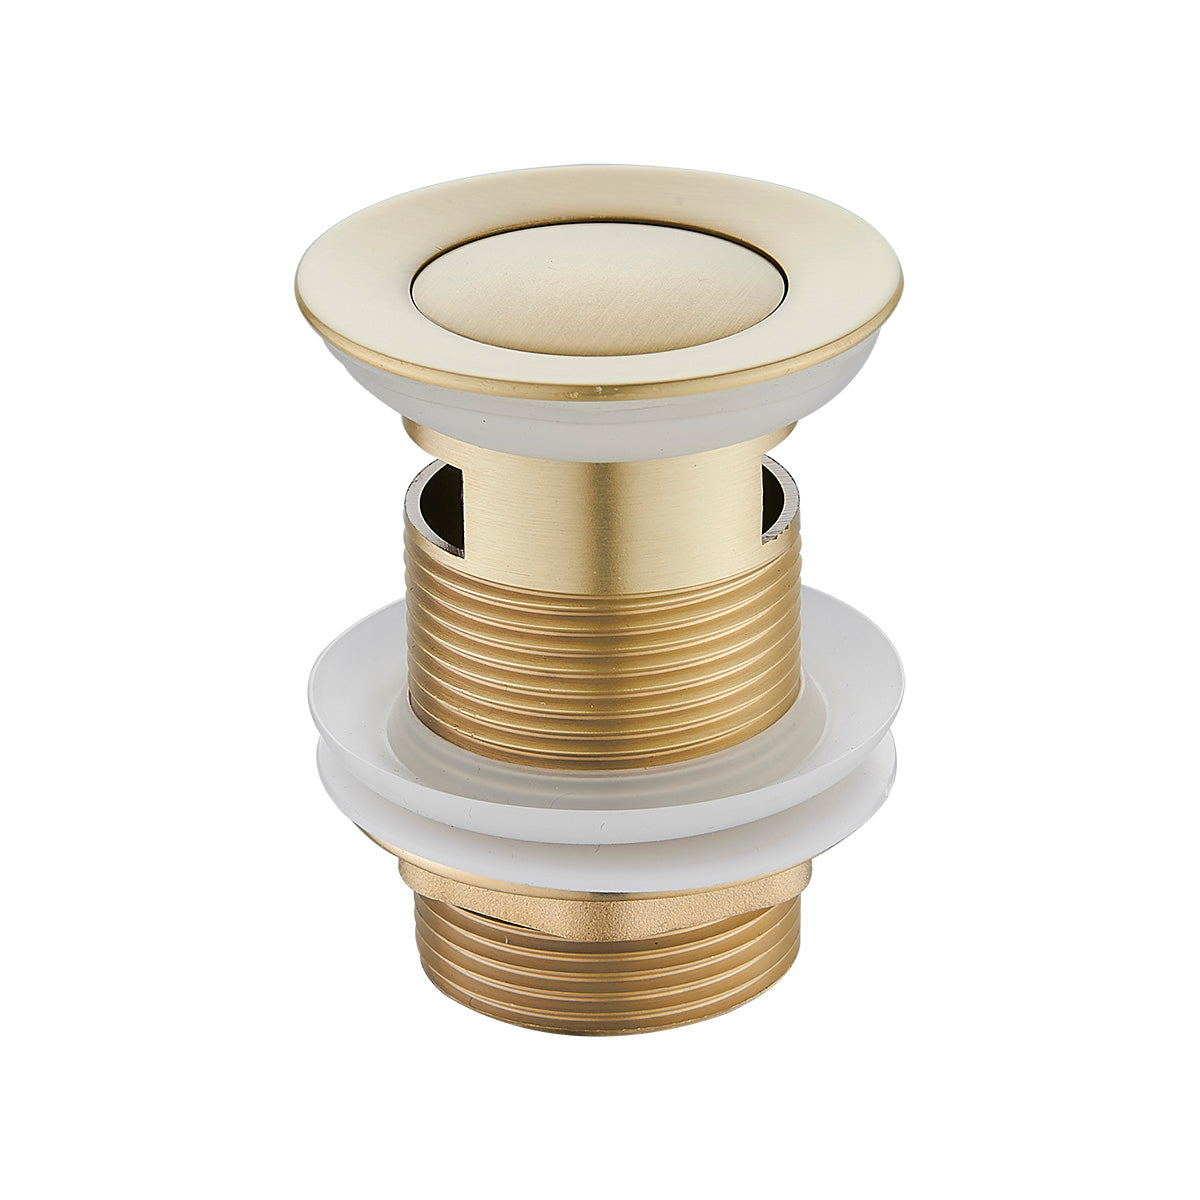 PPW32-2 (BG) / Push Plug Waste With Overflow 32mm (Brushed Gold) - Brushed Gold Push Plug Waste With Overflow 32mm